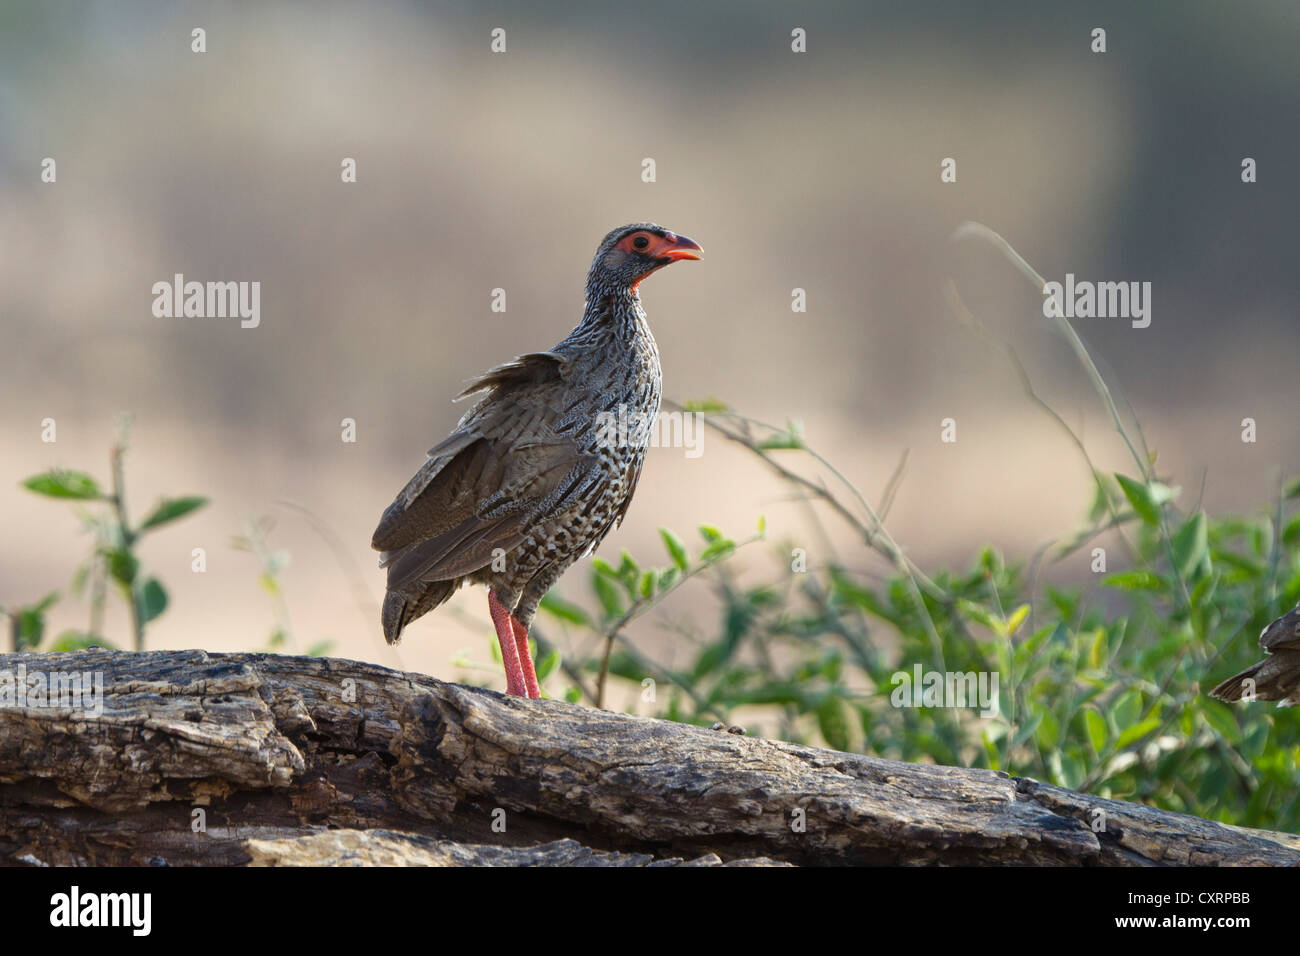 Red-necked Spurfowl or Red-necked Francolin (Pternistis afer), Ruaha National Park, Tanzania, East Africa, Africa Stock Photo